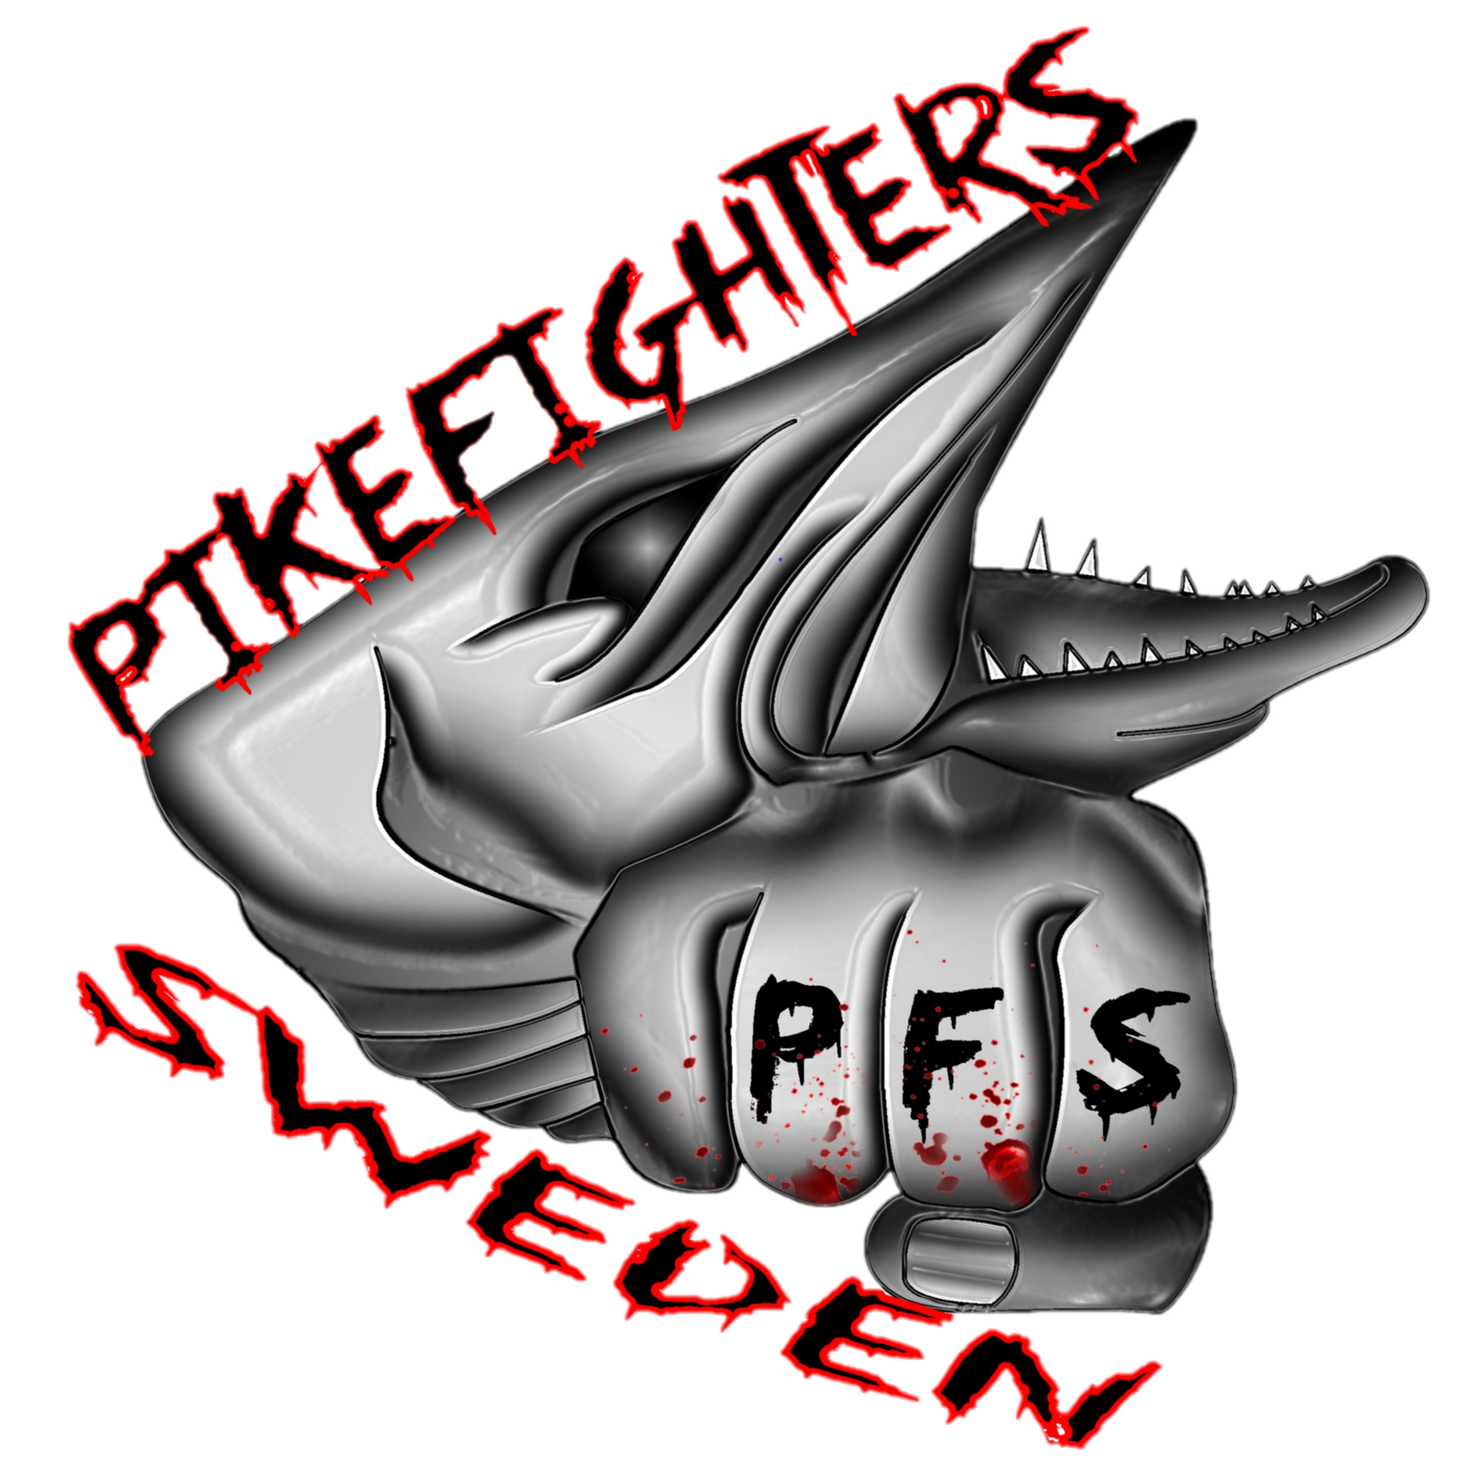 Pikefighters